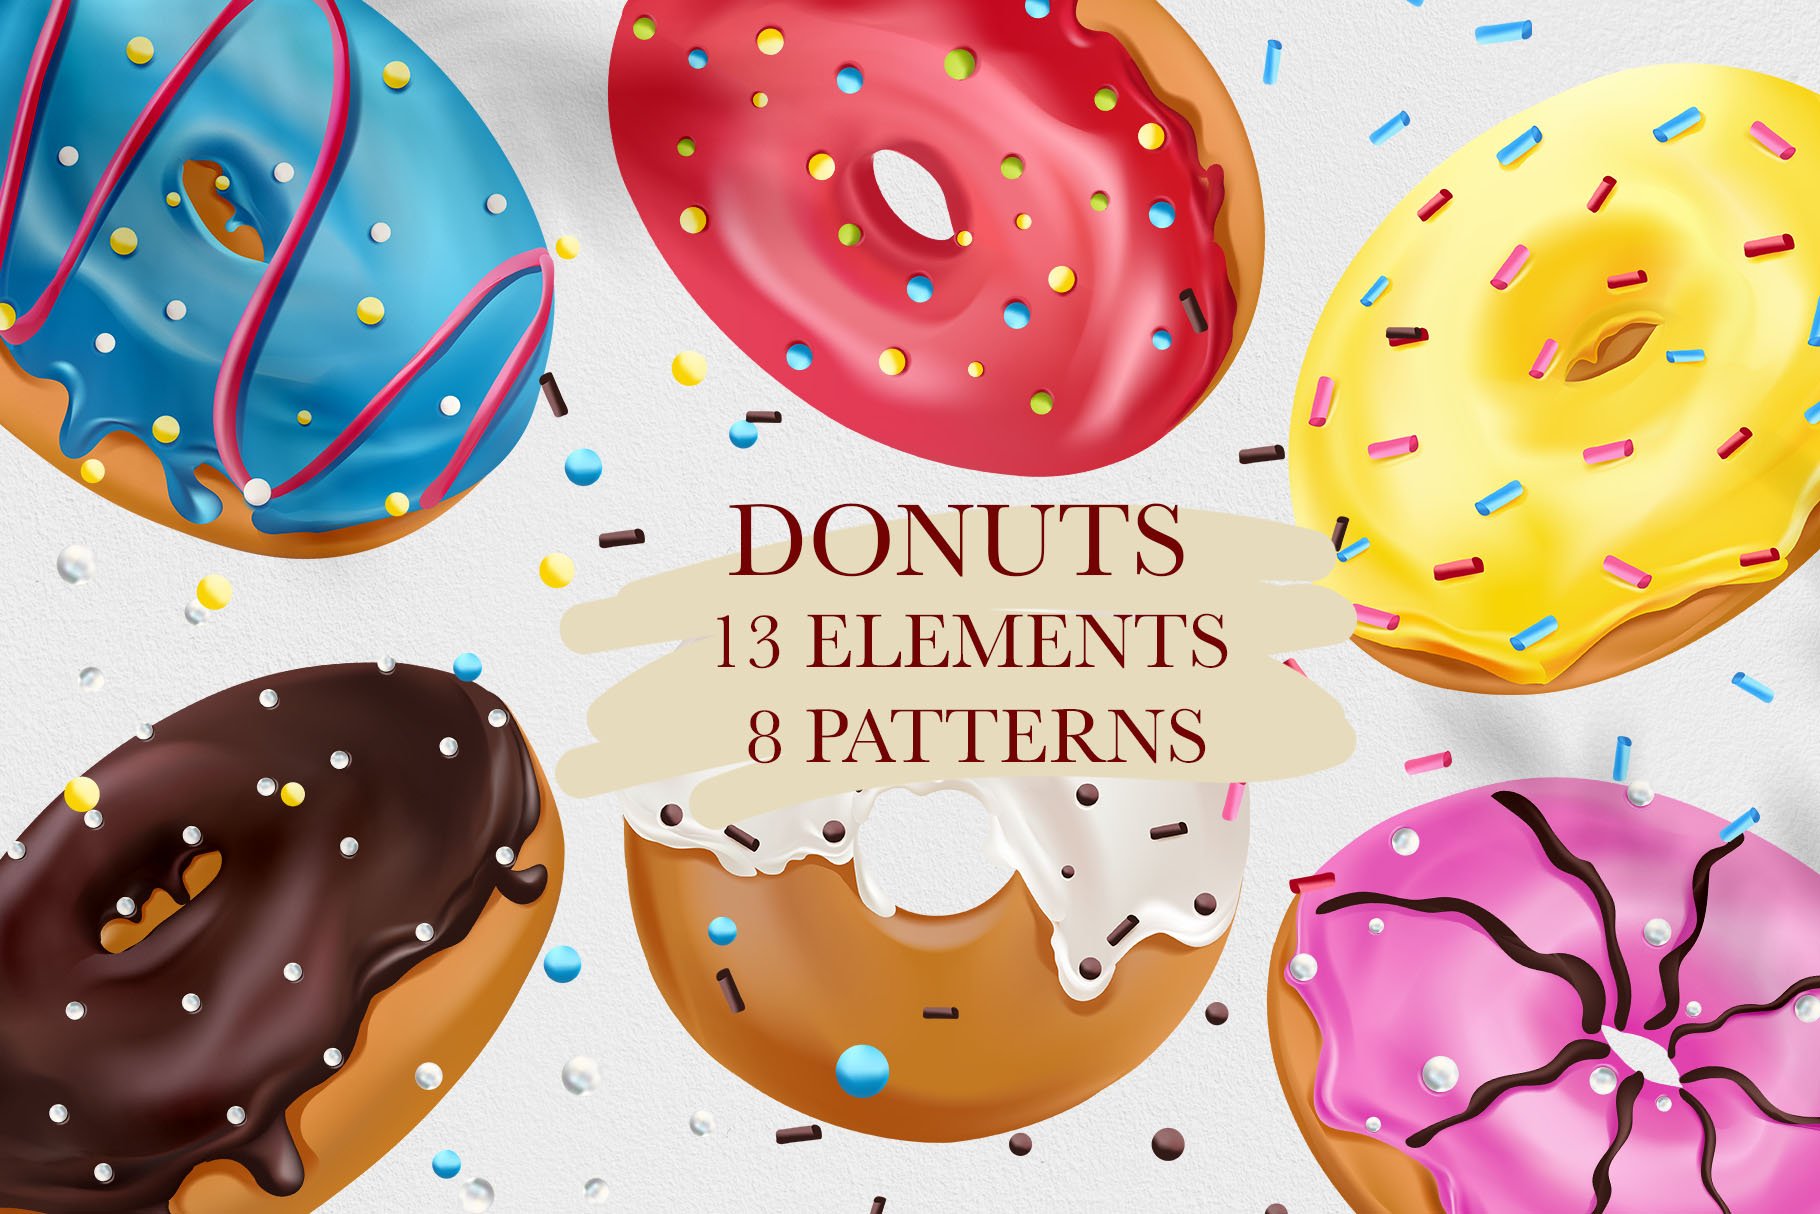 Sweet Donuts+Seamless Patterns cover image.